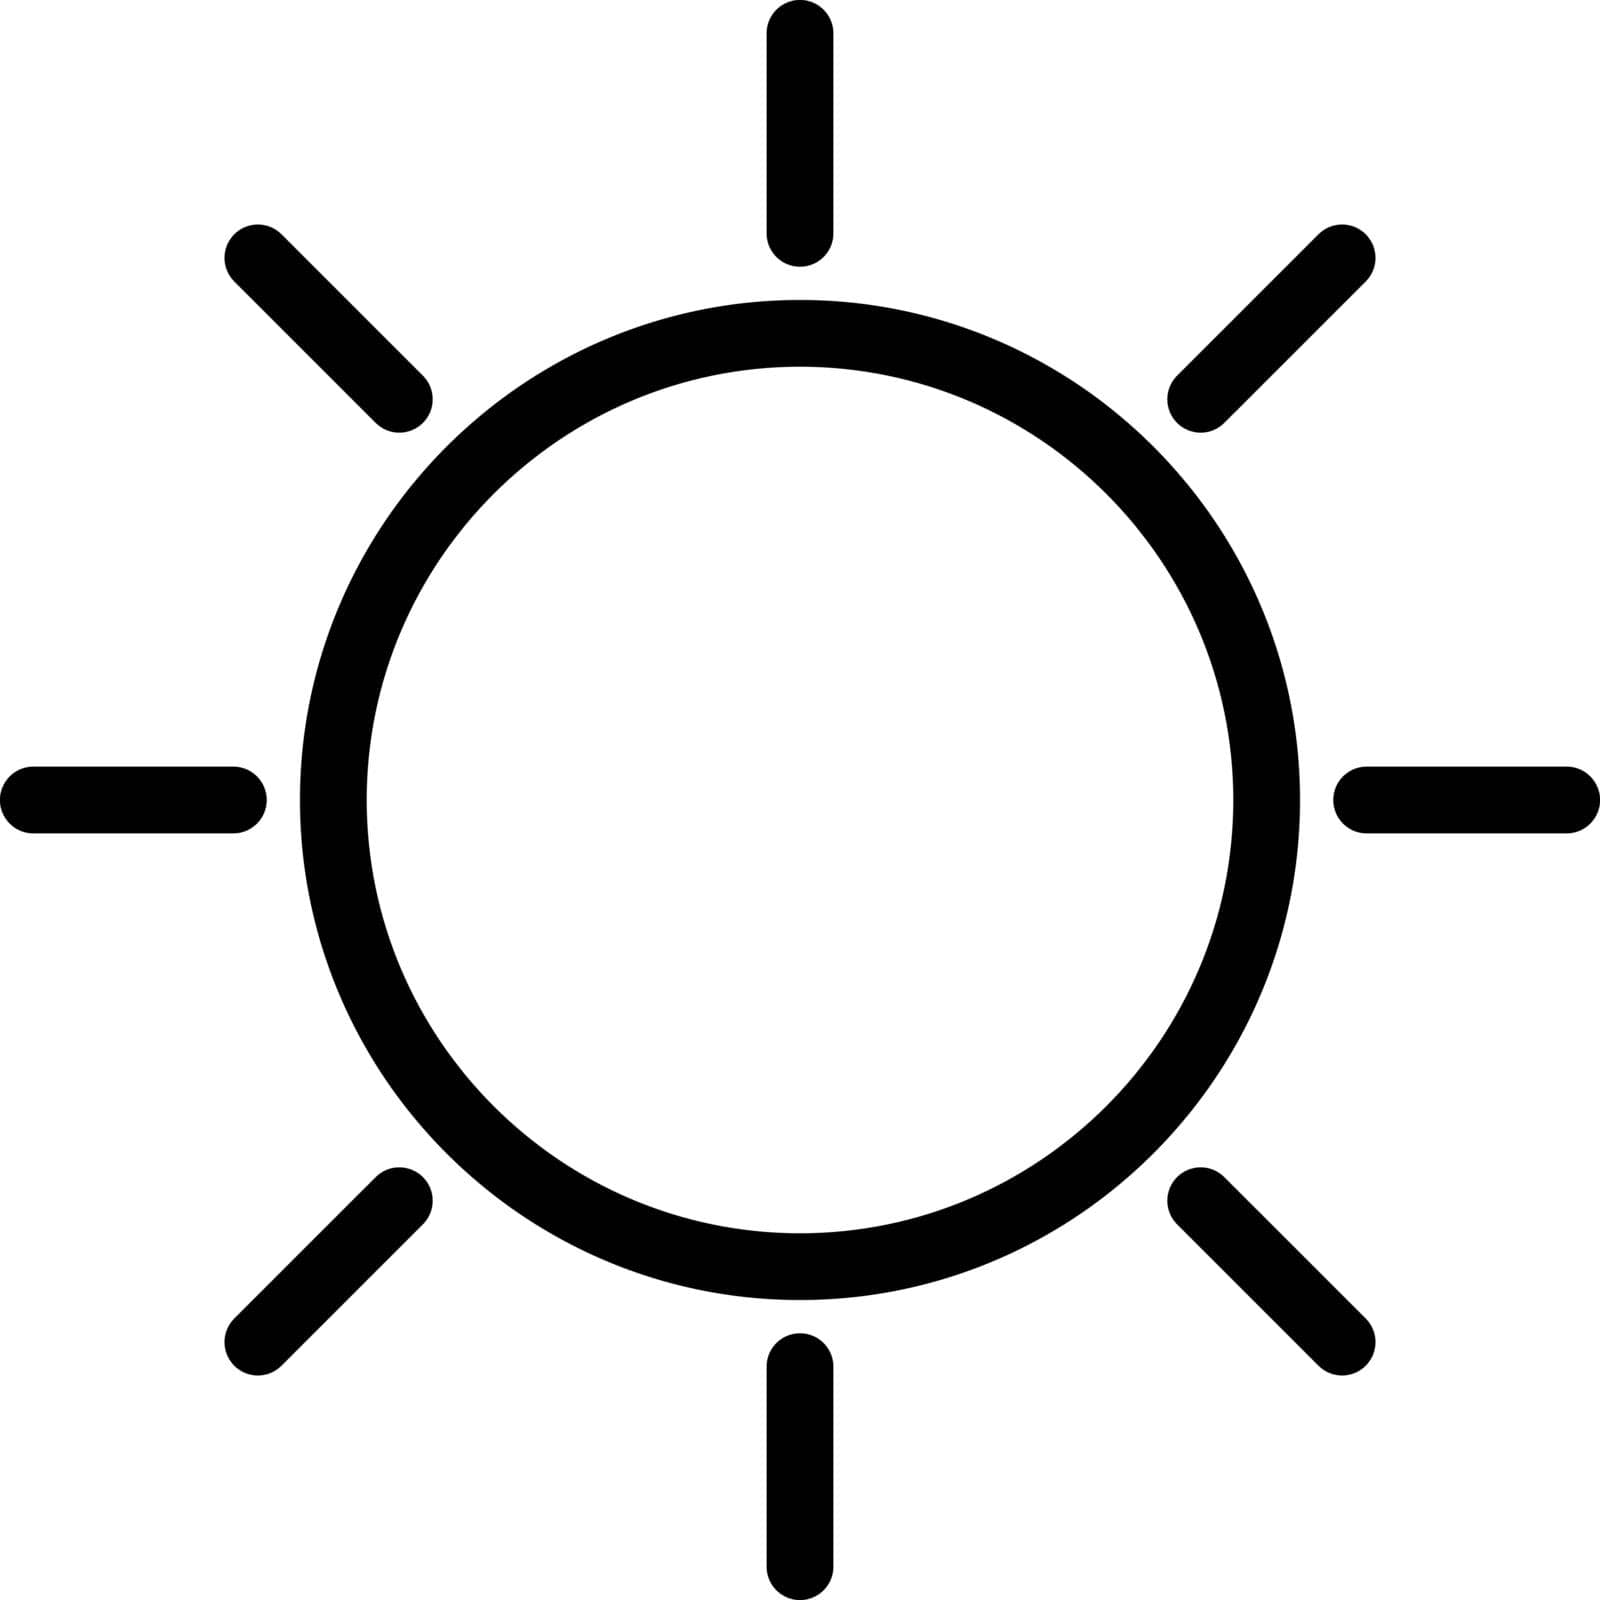 sun vector illustration on a transparent background.Premiumquality symbols.Thin line icons for concept and graphic design.